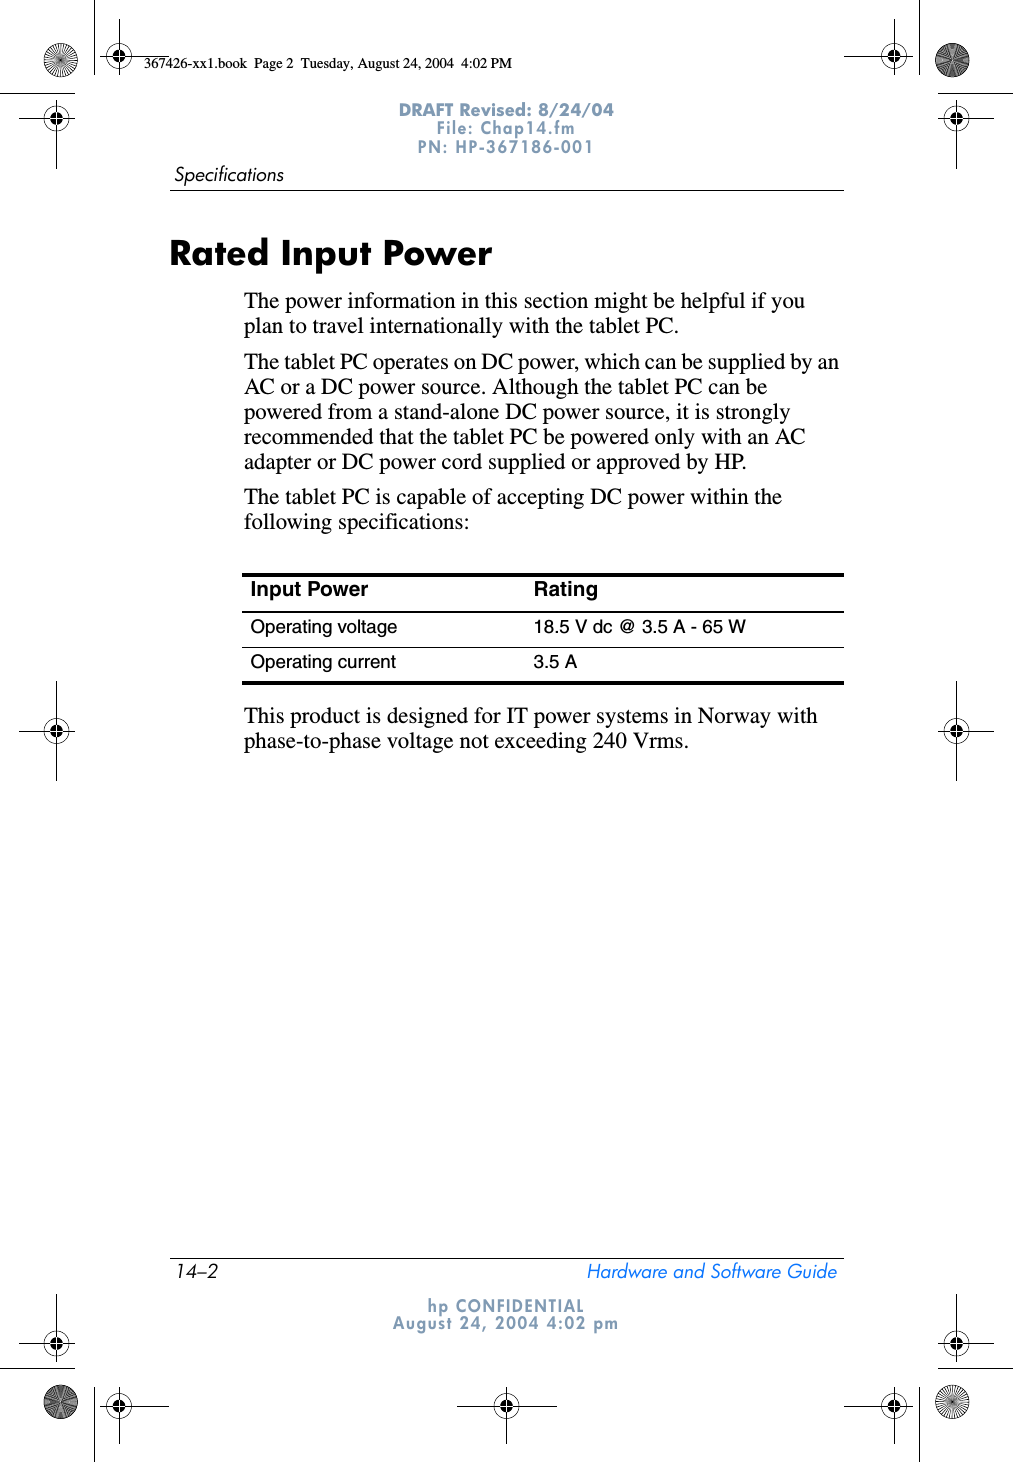 14–2 Hardware and Software GuideSpecificationsDRAFT Revised: 8/24/04File: Chap14.fm PN: HP-367186-001 hp CONFIDENTIALAugust 24, 2004 4:02 pmRated Input PowerThe power information in this section might be helpful if you plan to travel internationally with the tablet PC.The tablet PC operates on DC power, which can be supplied by an AC or a DC power source. Although the tablet PC can be powered from a stand-alone DC power source, it is strongly recommended that the tablet PC be powered only with an AC adapter or DC power cord supplied or approved by HP.The tablet PC is capable of accepting DC power within the following specifications:This product is designed for IT power systems in Norway with phase-to-phase voltage not exceeding 240 Vrms.Input Power RatingOperating voltage 18.5 V dc @ 3.5 A - 65 WOperating current 3.5 A367426-xx1.book  Page 2  Tuesday, August 24, 2004  4:02 PM